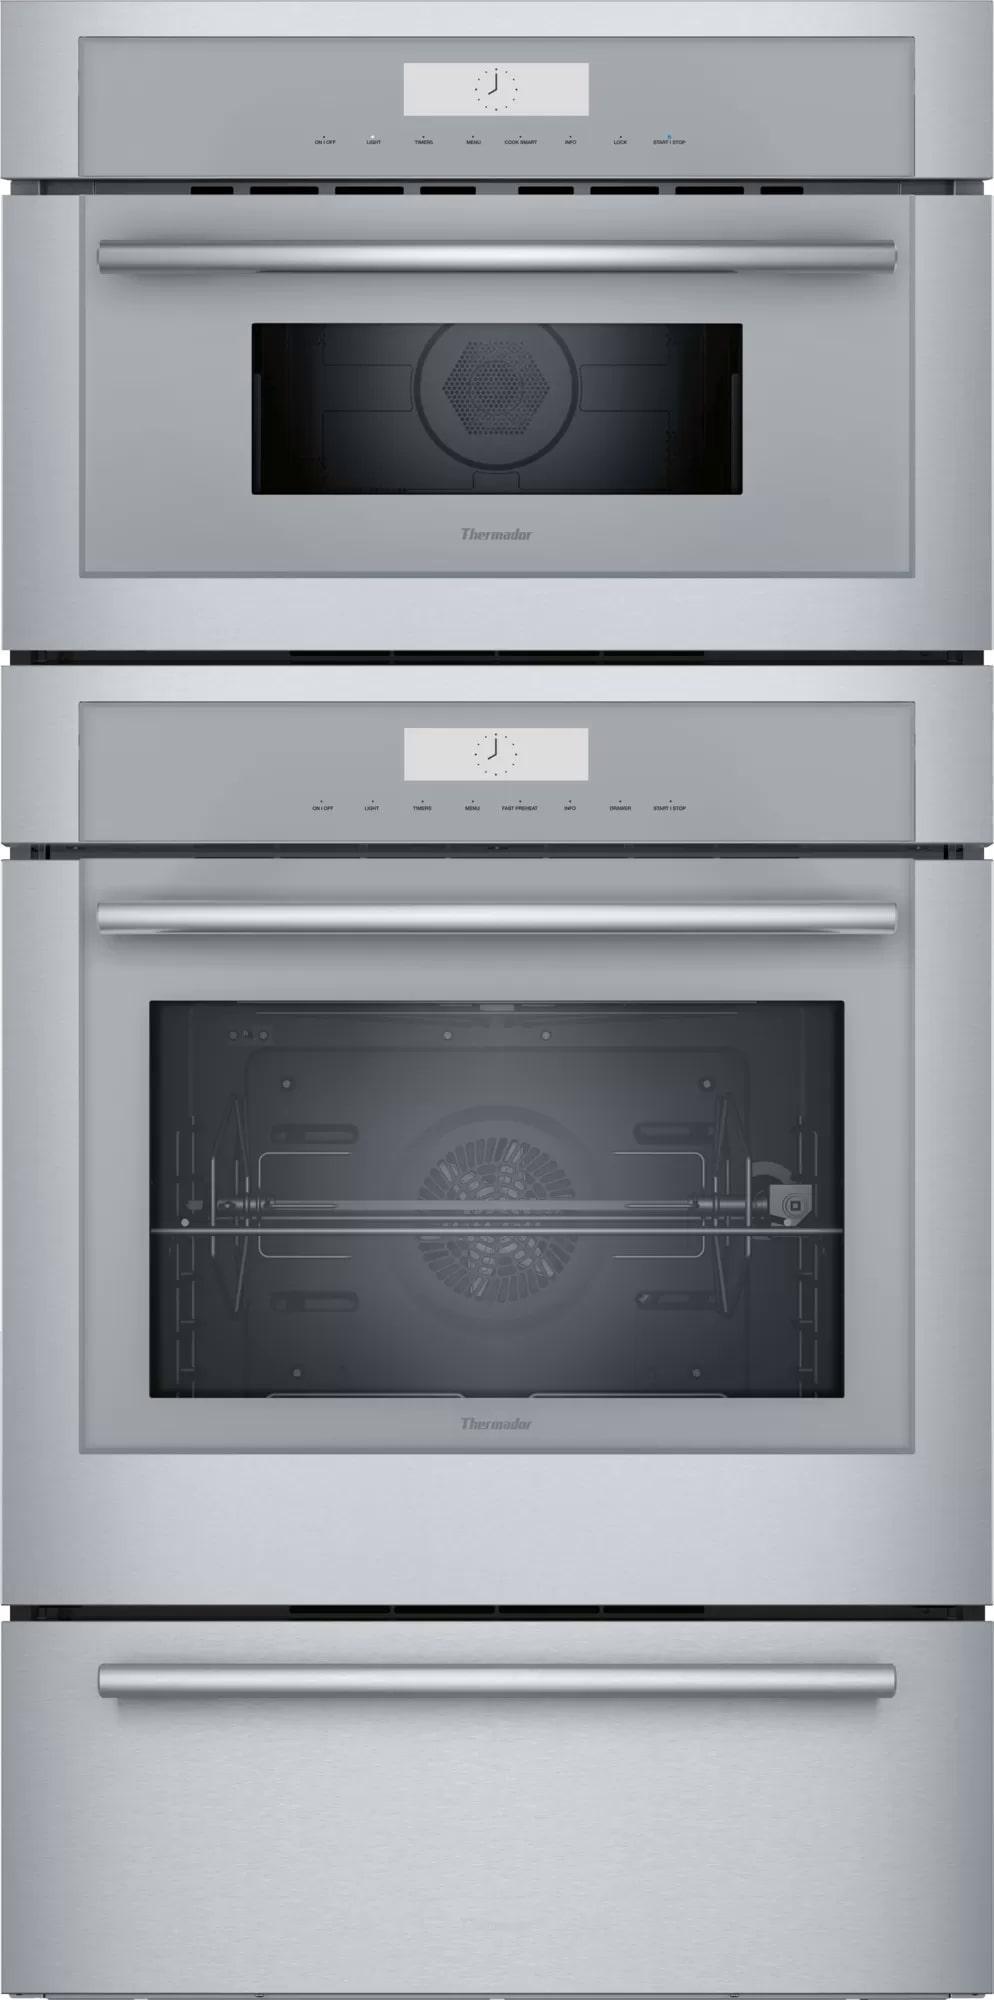 Thermador - 8.6 cu. ft Combination Oven in Stainless - MEDMCW31WS